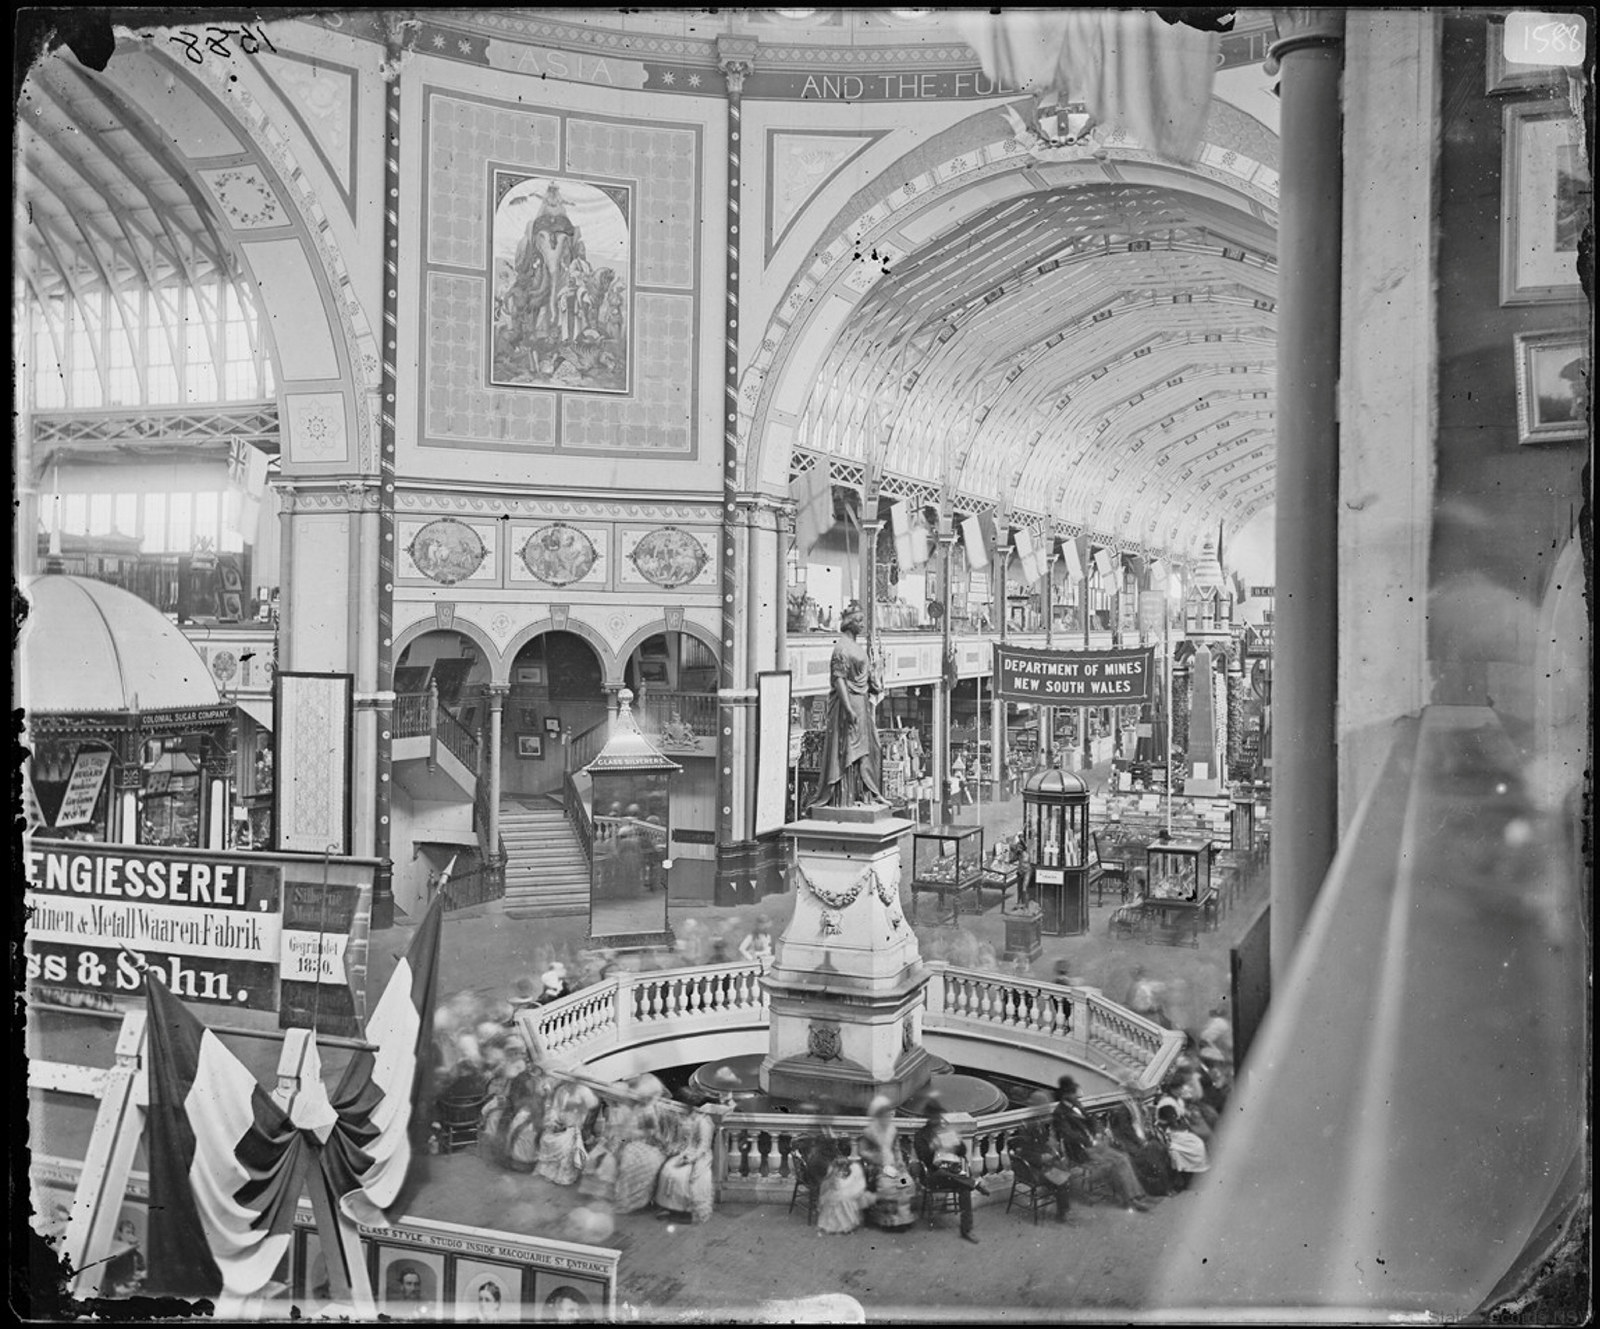 Inside the Garden Palace at the Sydney International Exhibition, 1879. NRS 4481 SH1588